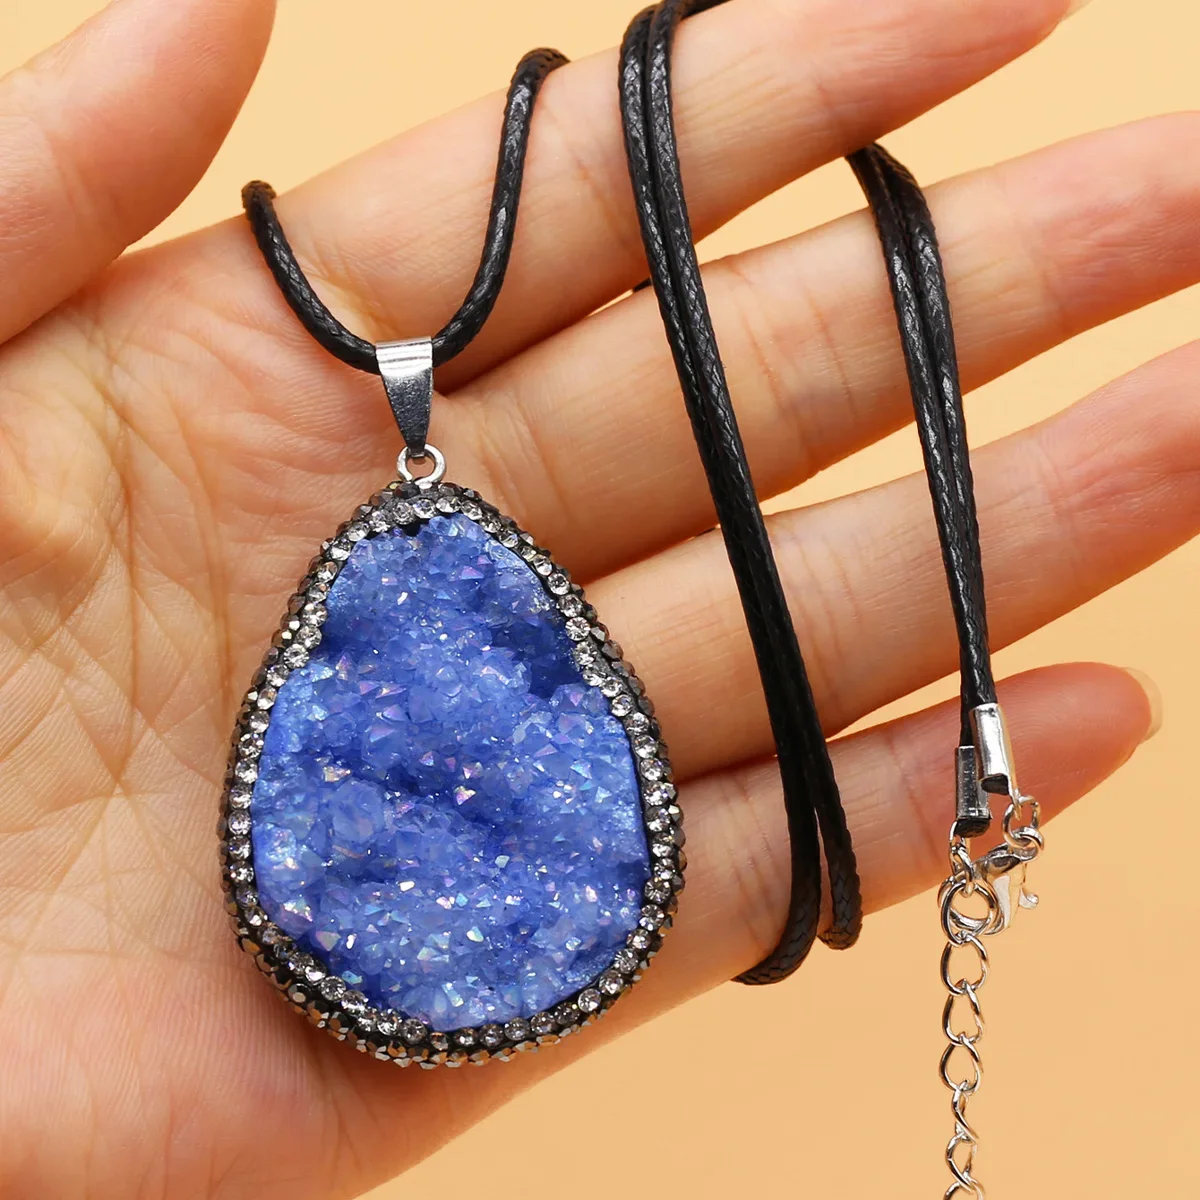 

Natural Semi Precious Blue Crystal Bud Pendant Necklace Reiki Healing Exquisite Rhinestone Sparkling Jewelry Party Birthday Gift